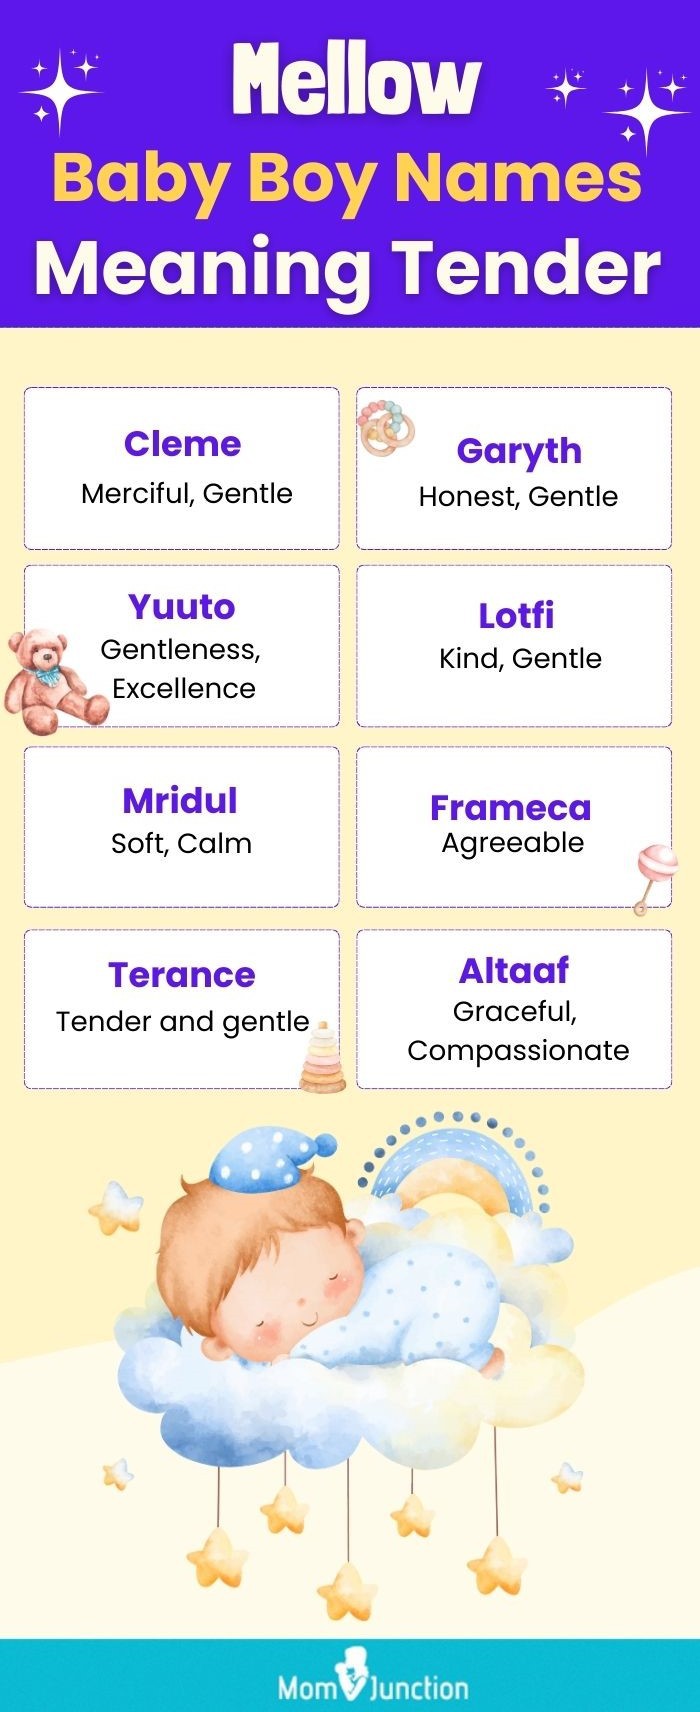 mellow baby boy names meaning tenderdynamic (infographic)